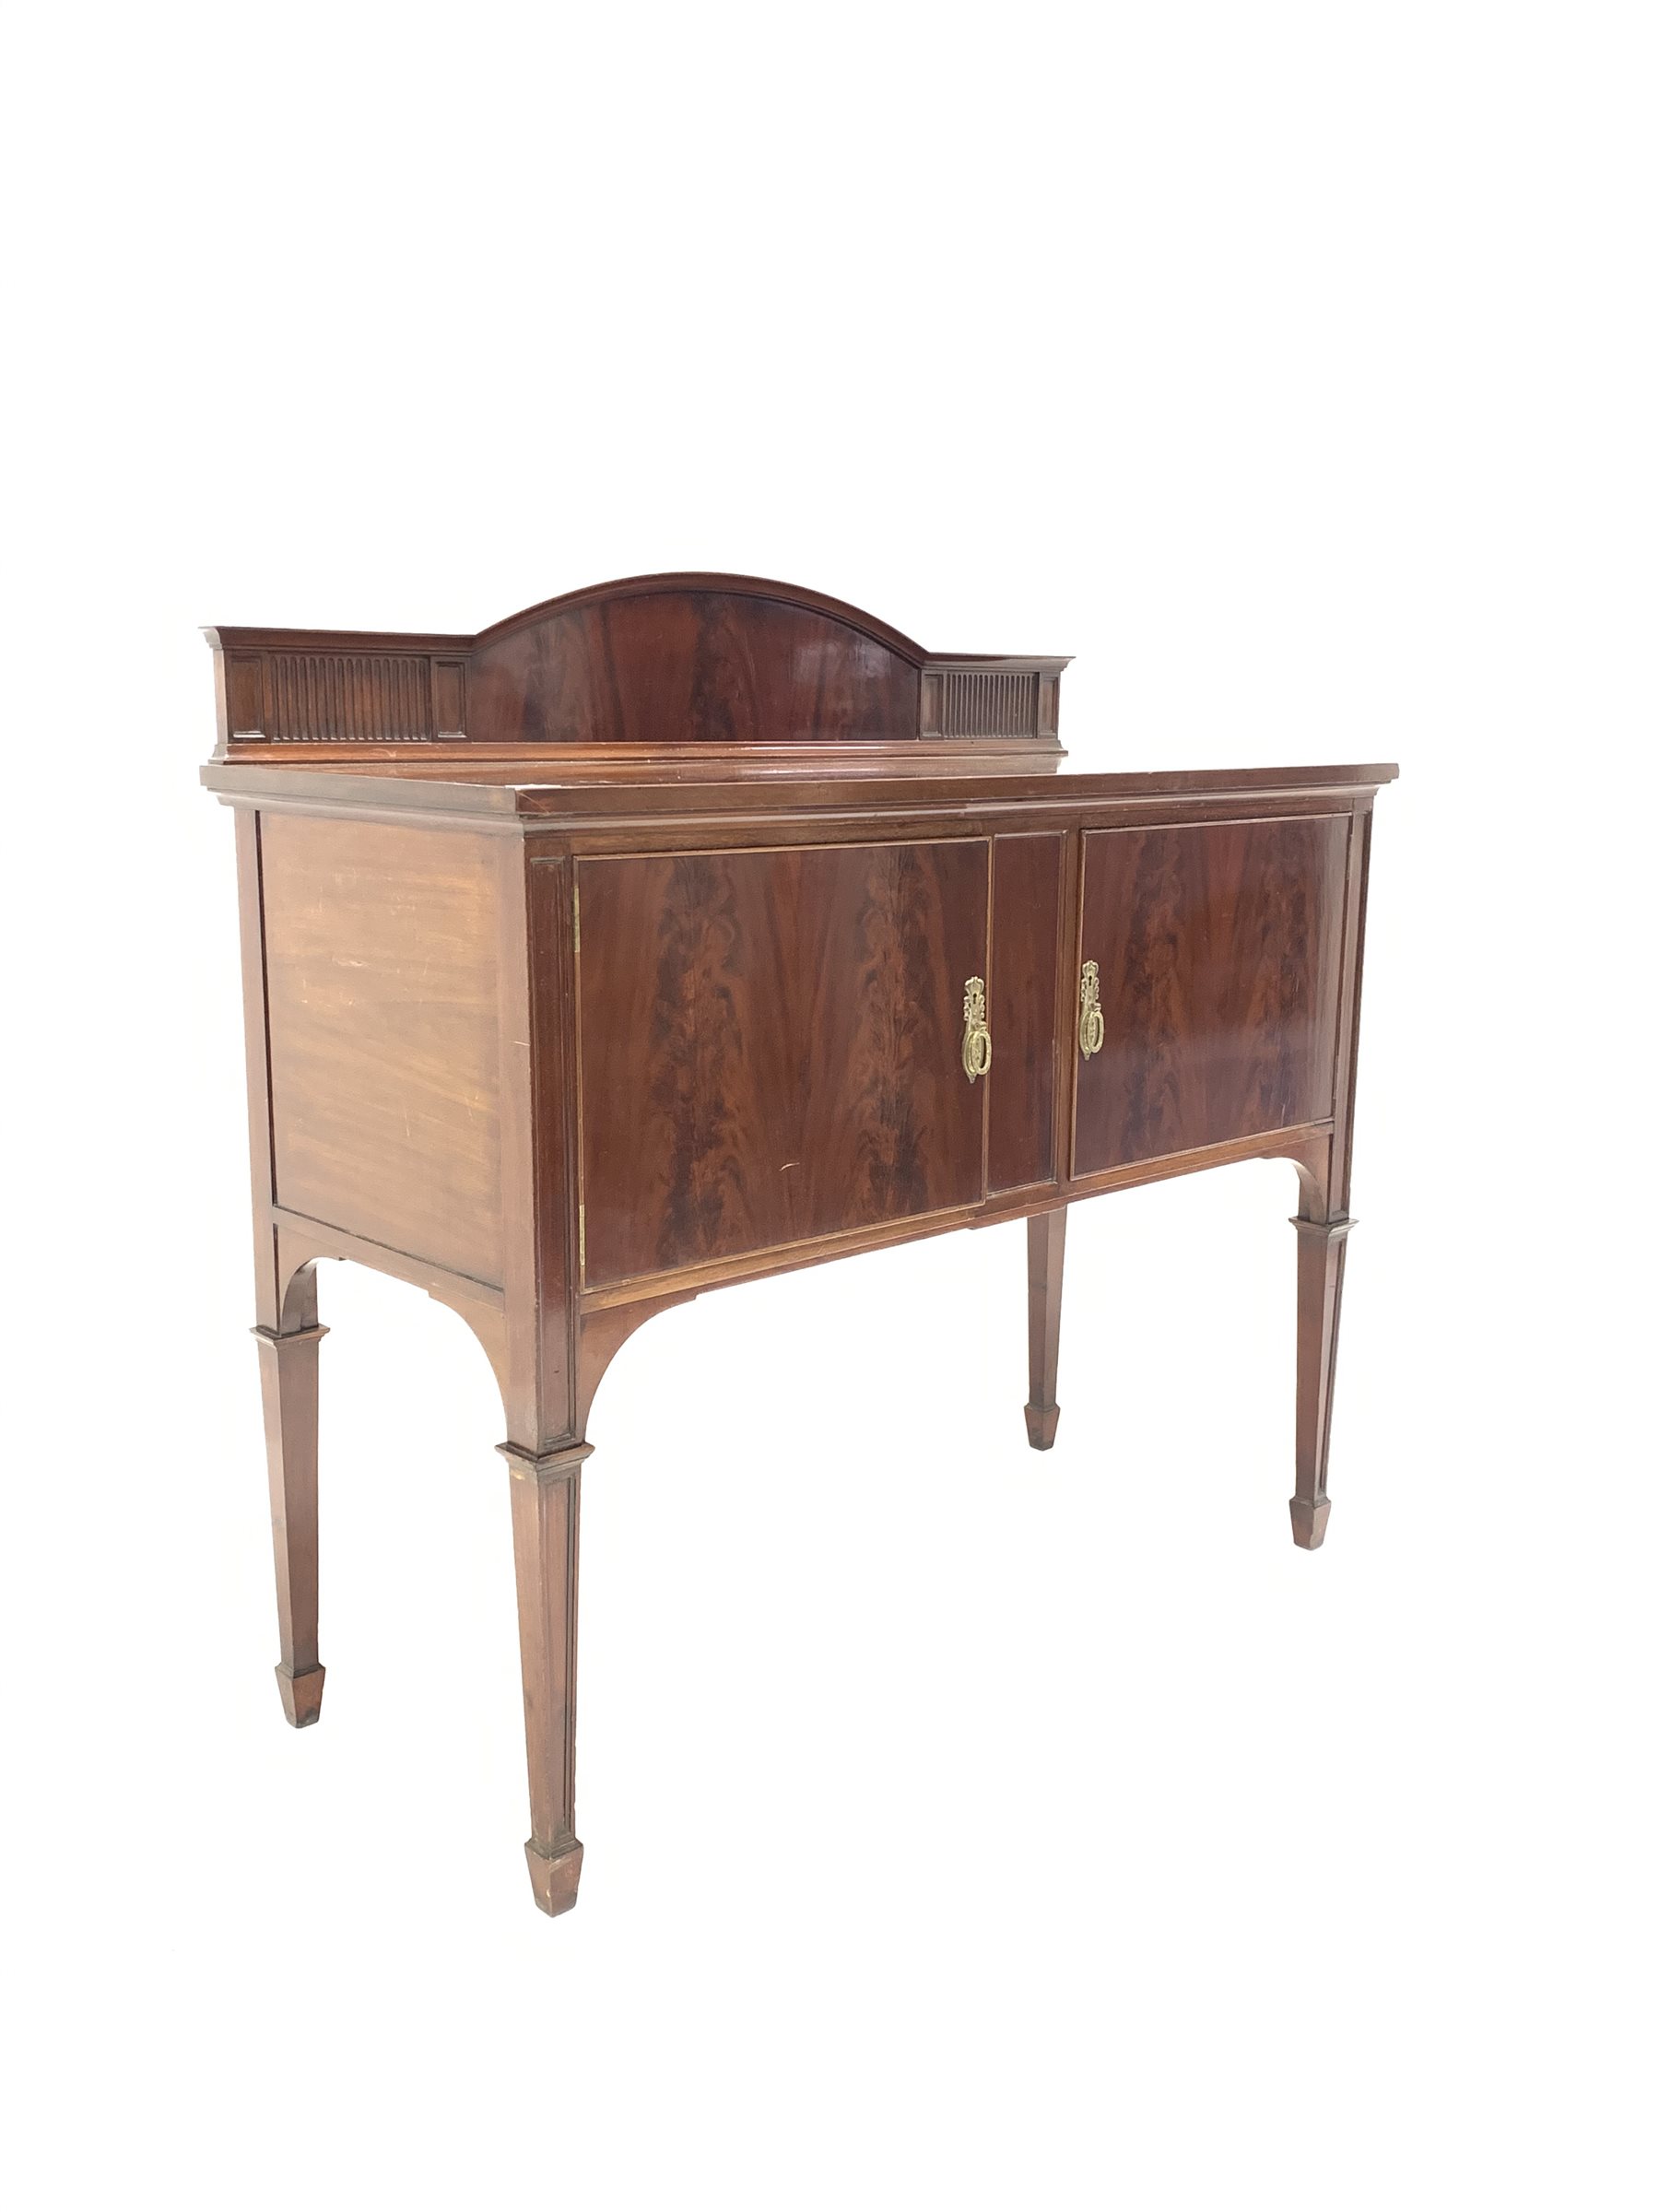 Georgian design mahogany sideboard, raised arched back with fluted decoration over two cupboards, ra - Image 2 of 4